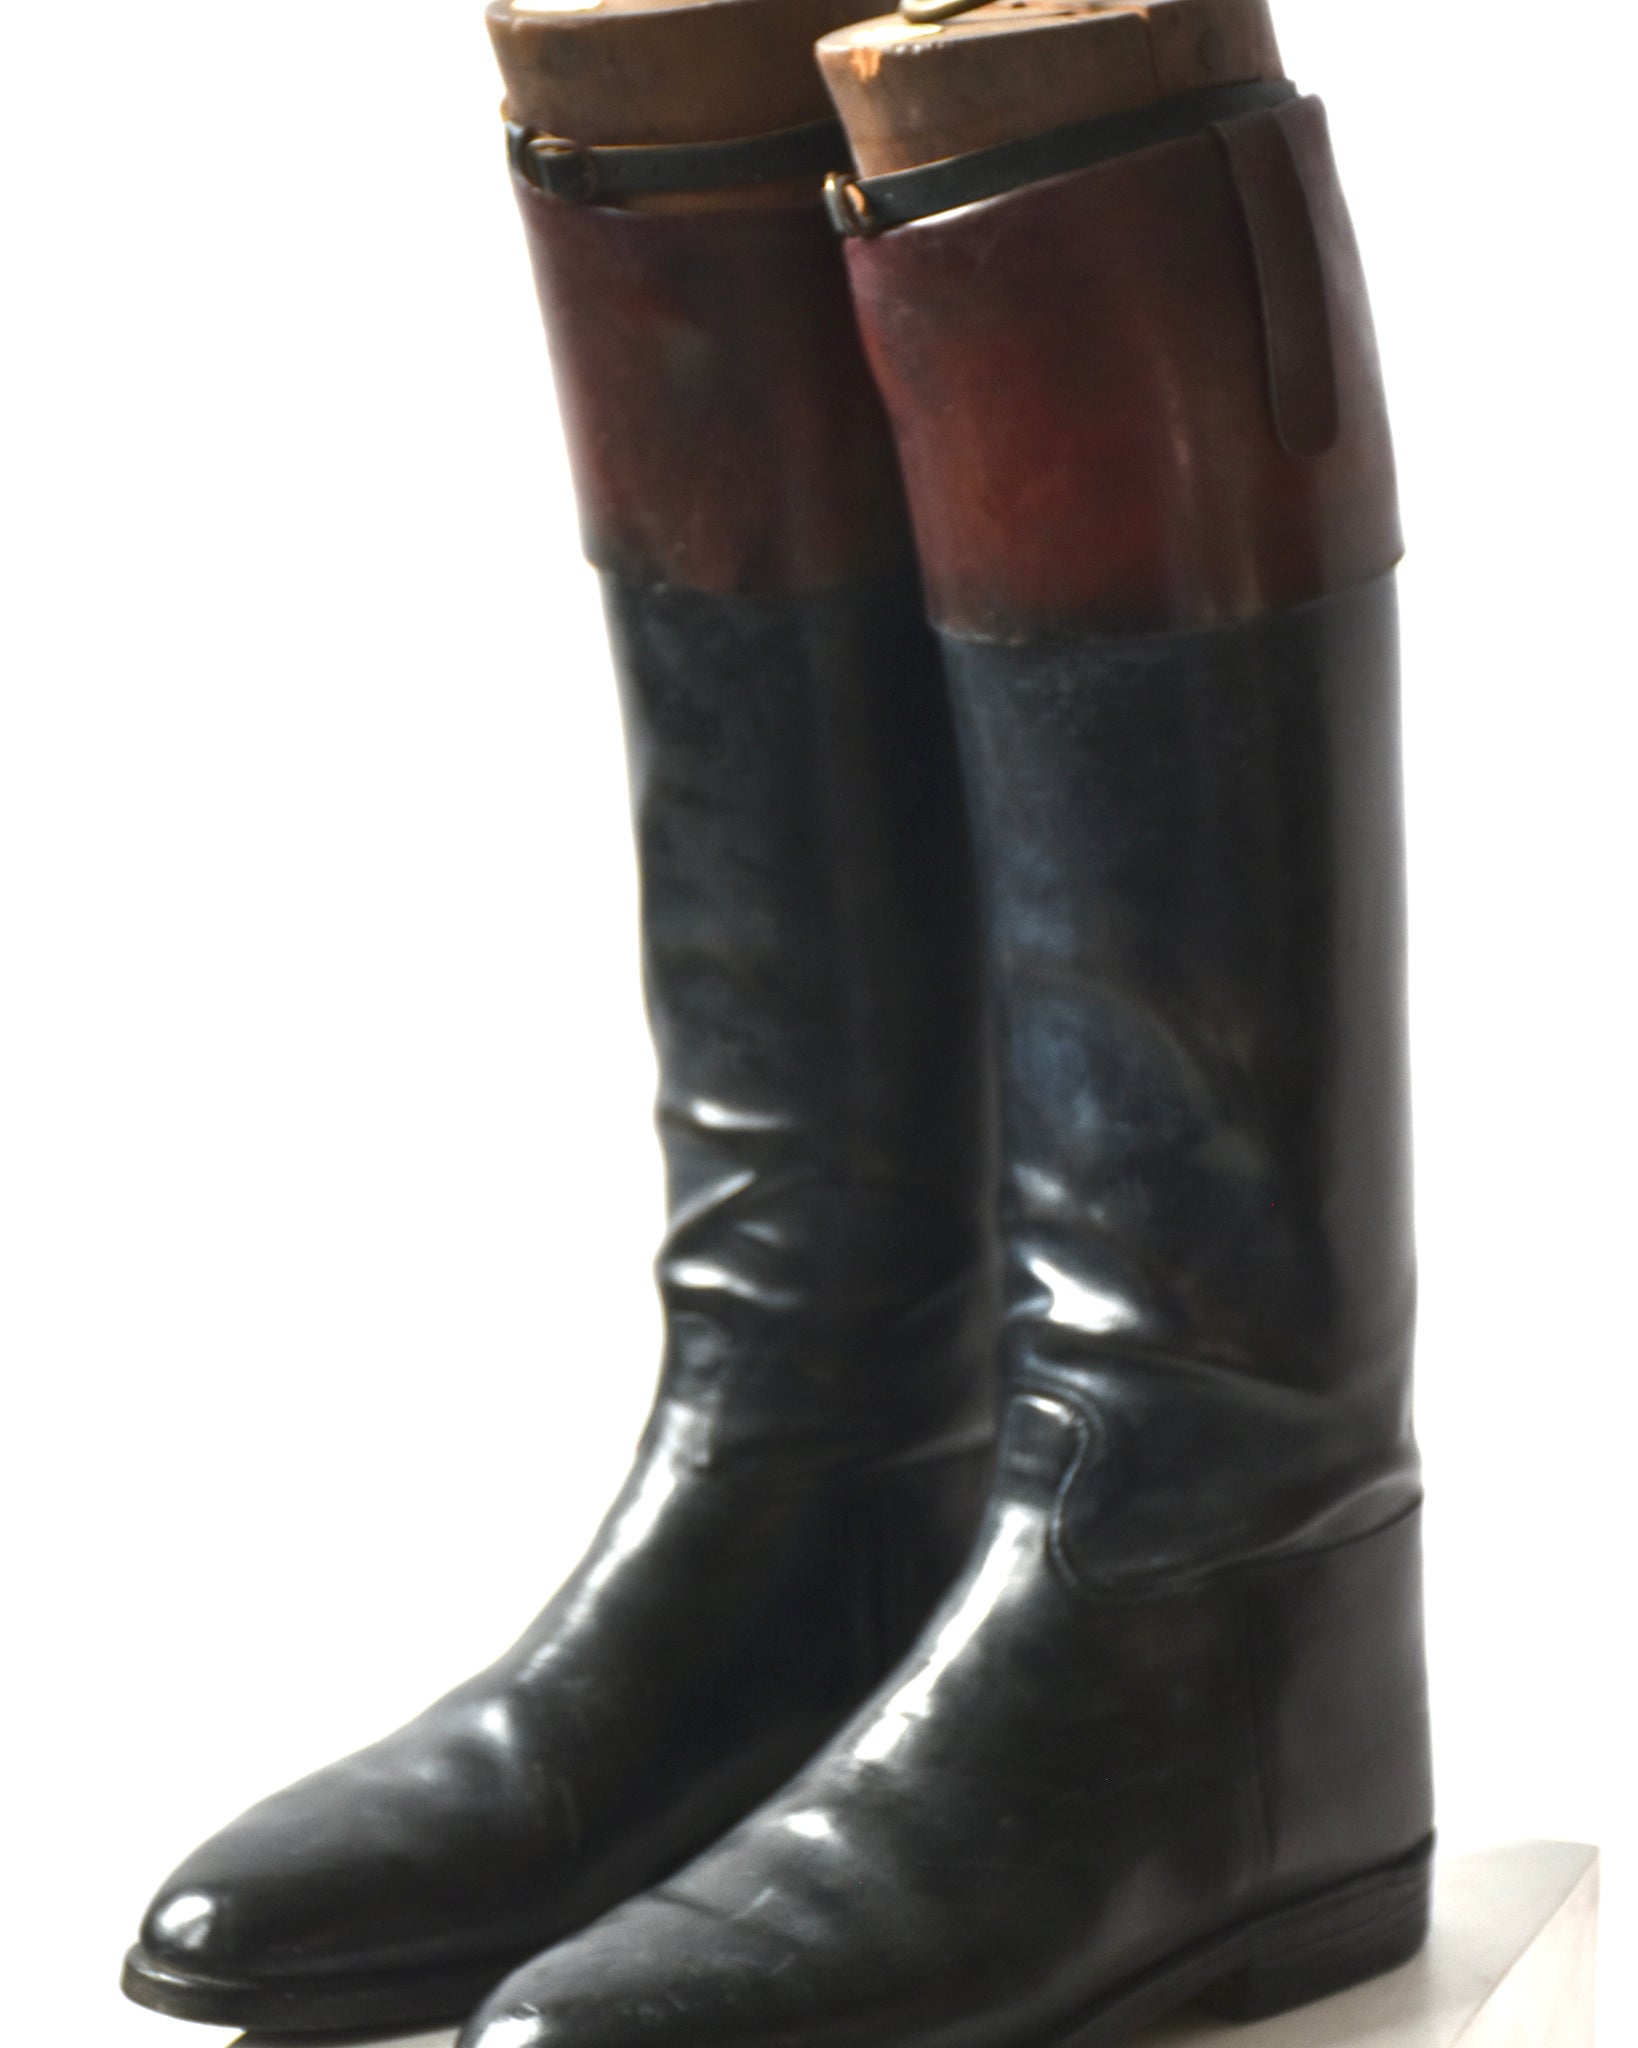 SOLD - Edwardian Mens Leather Riding Boots